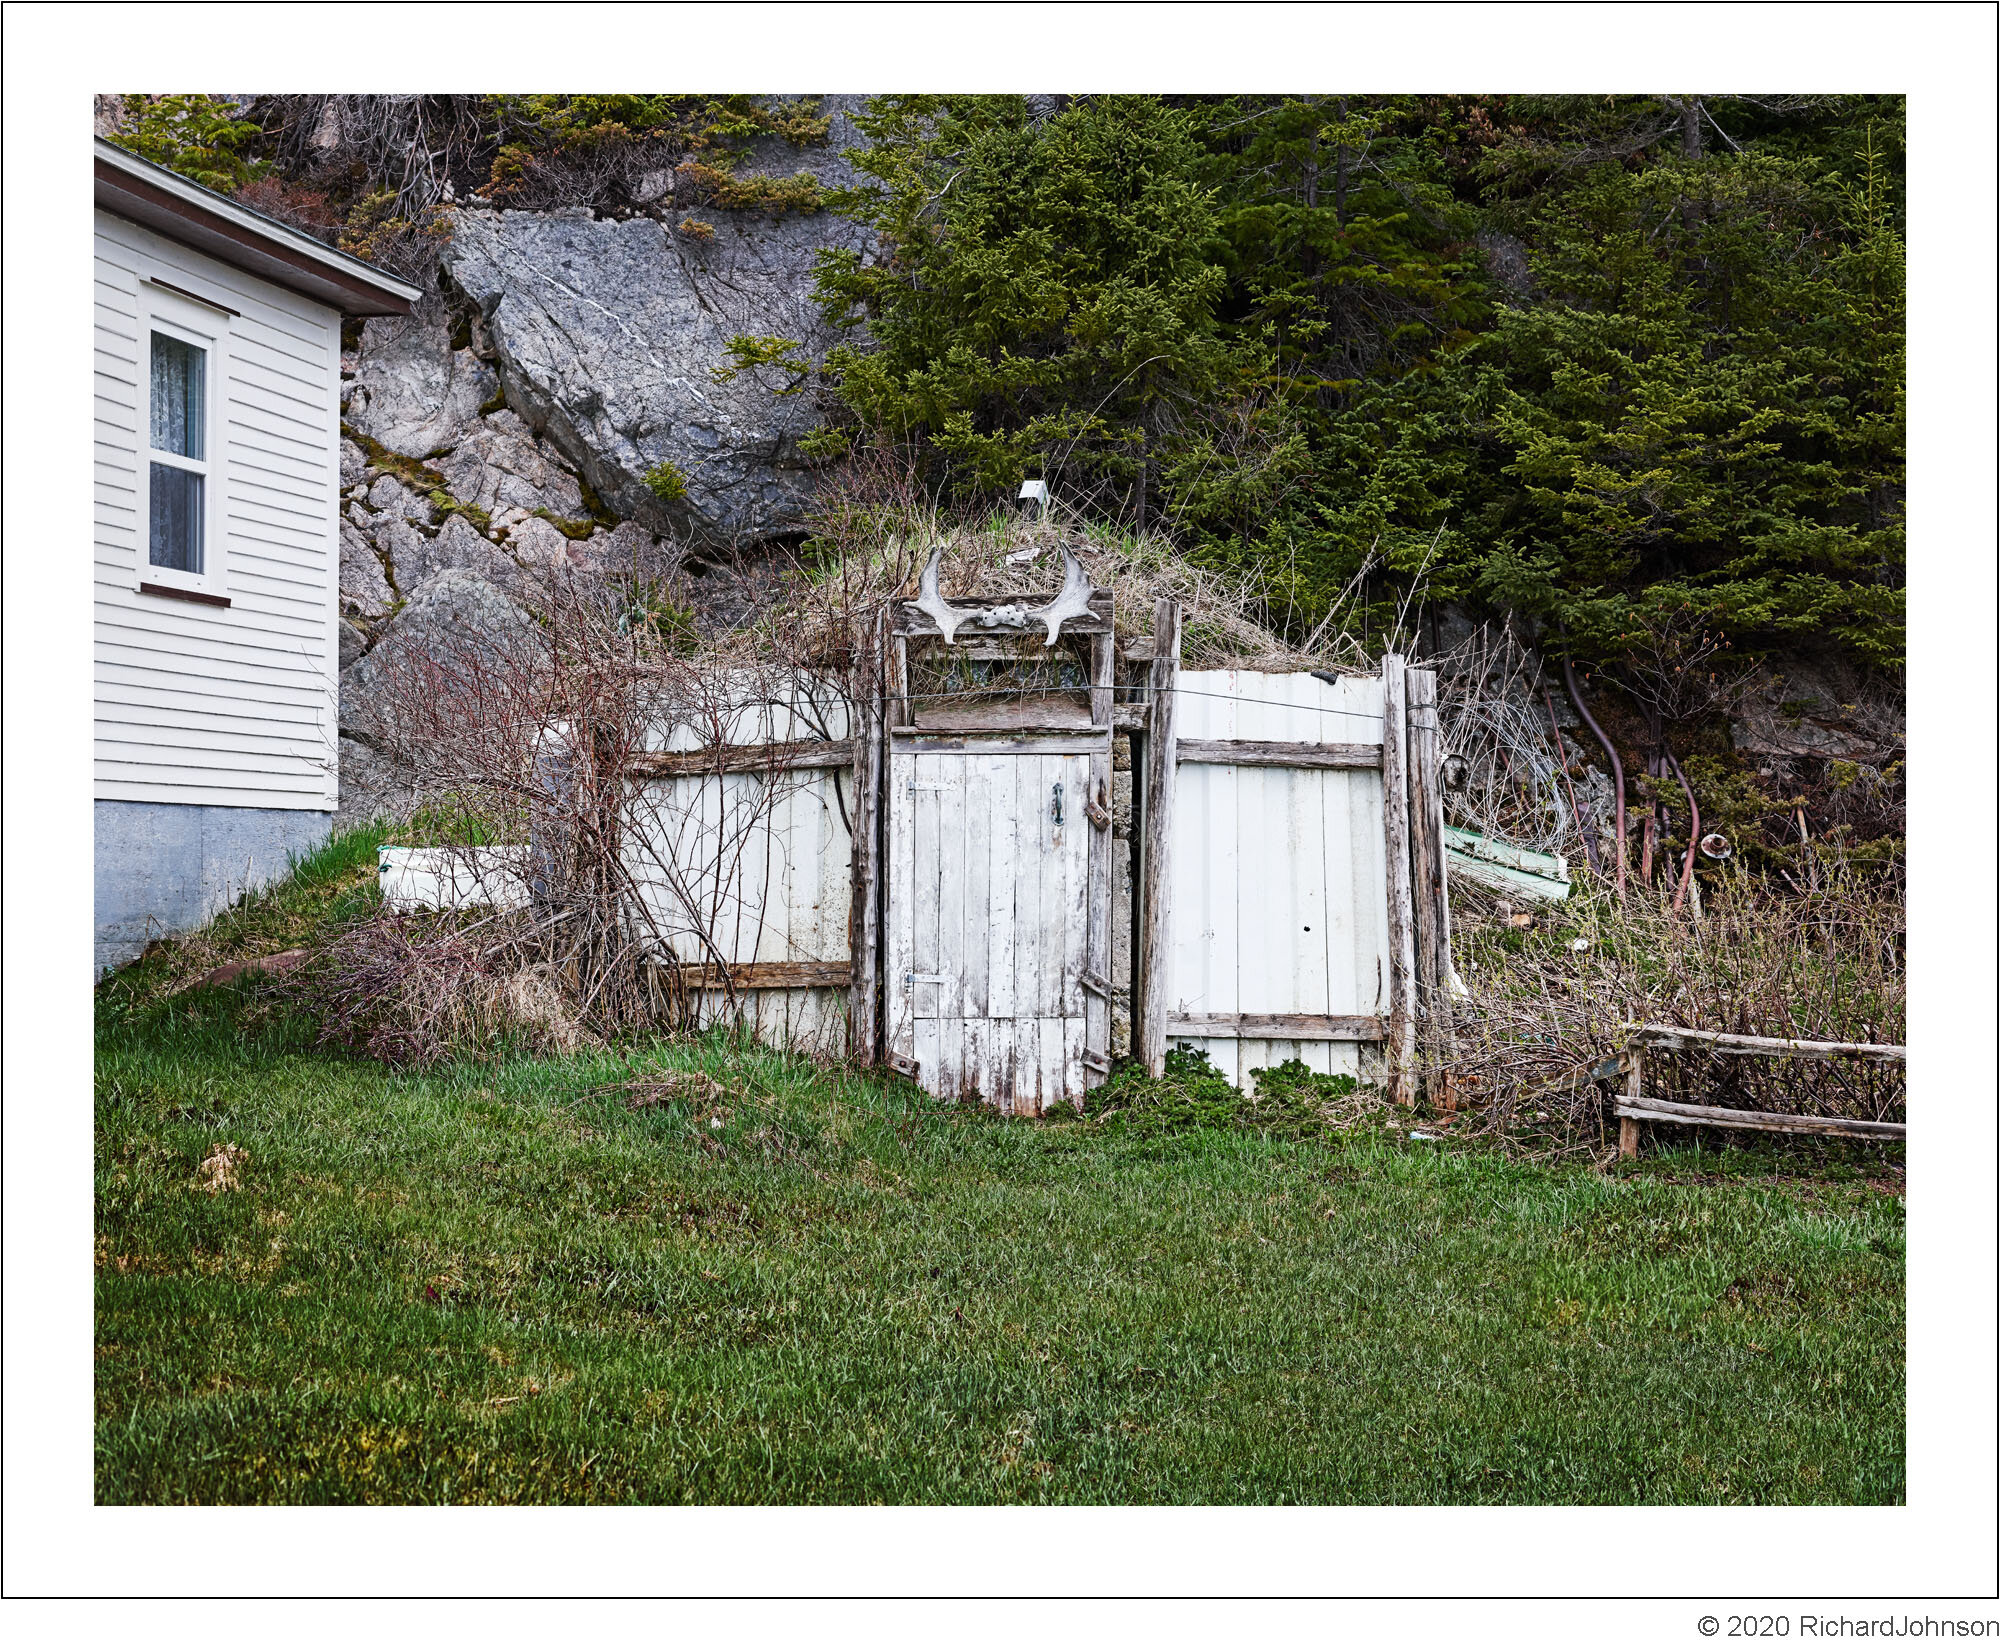 Root Cellar # 58, Little Harbour, Newfoundland, Canada, 2018